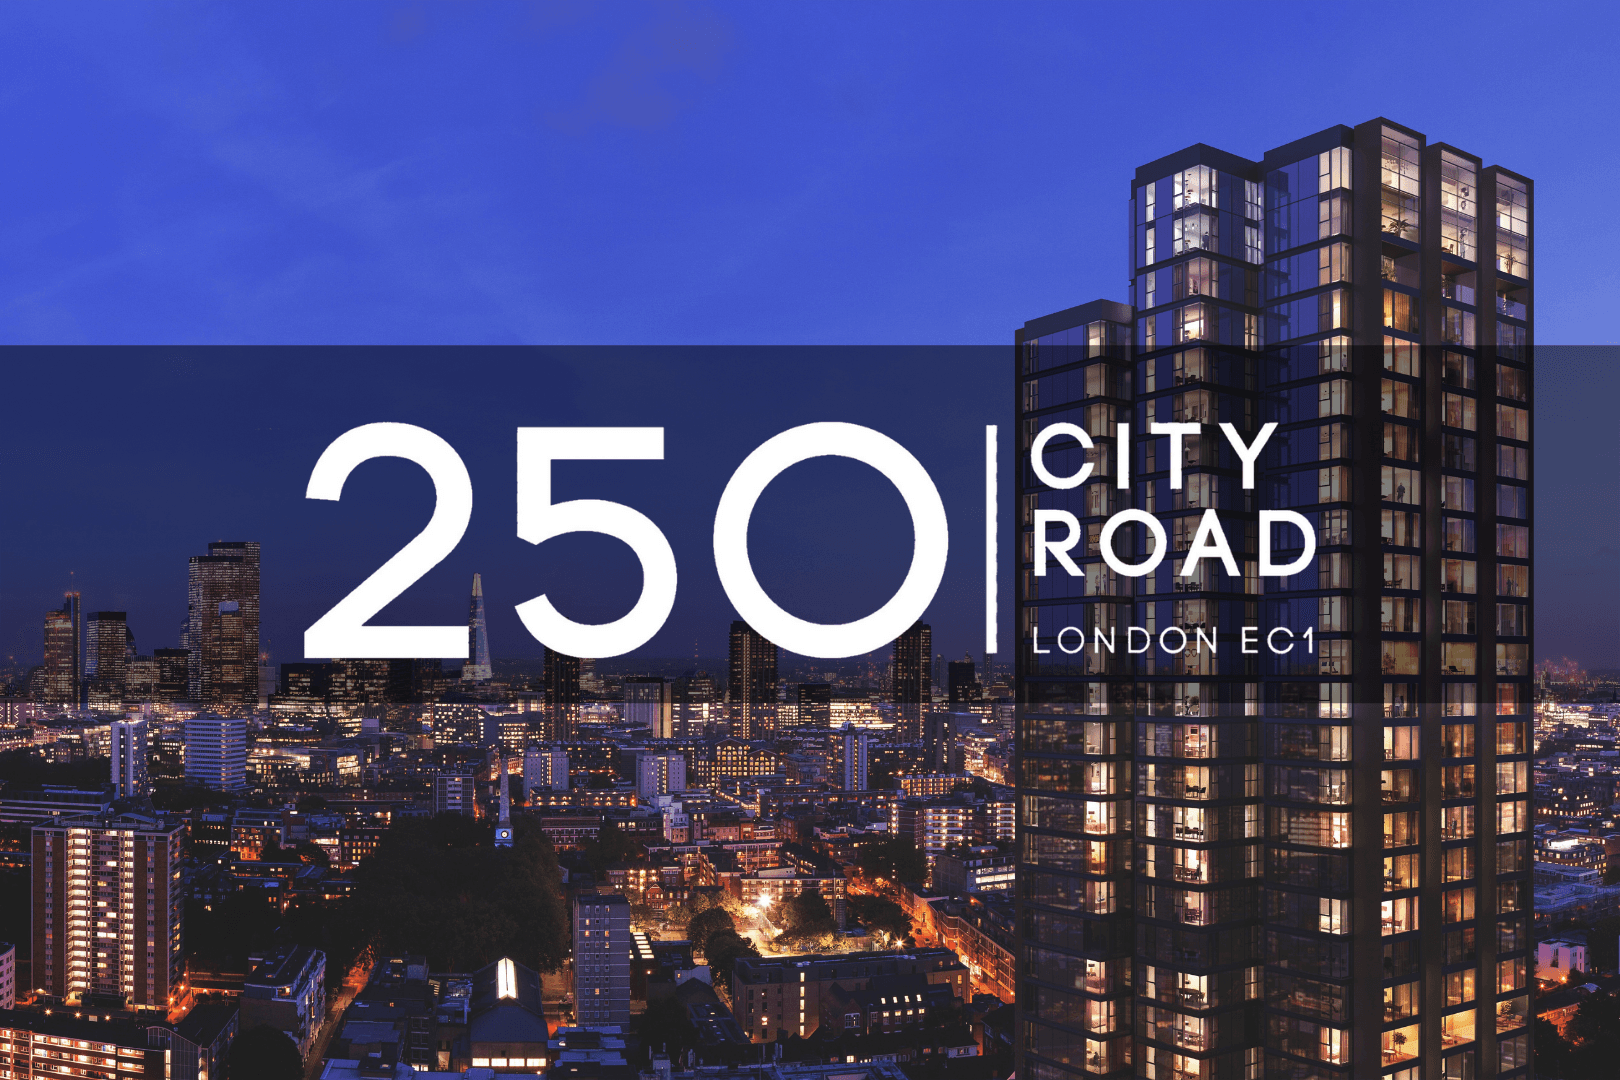 Welcome to 250 City Road